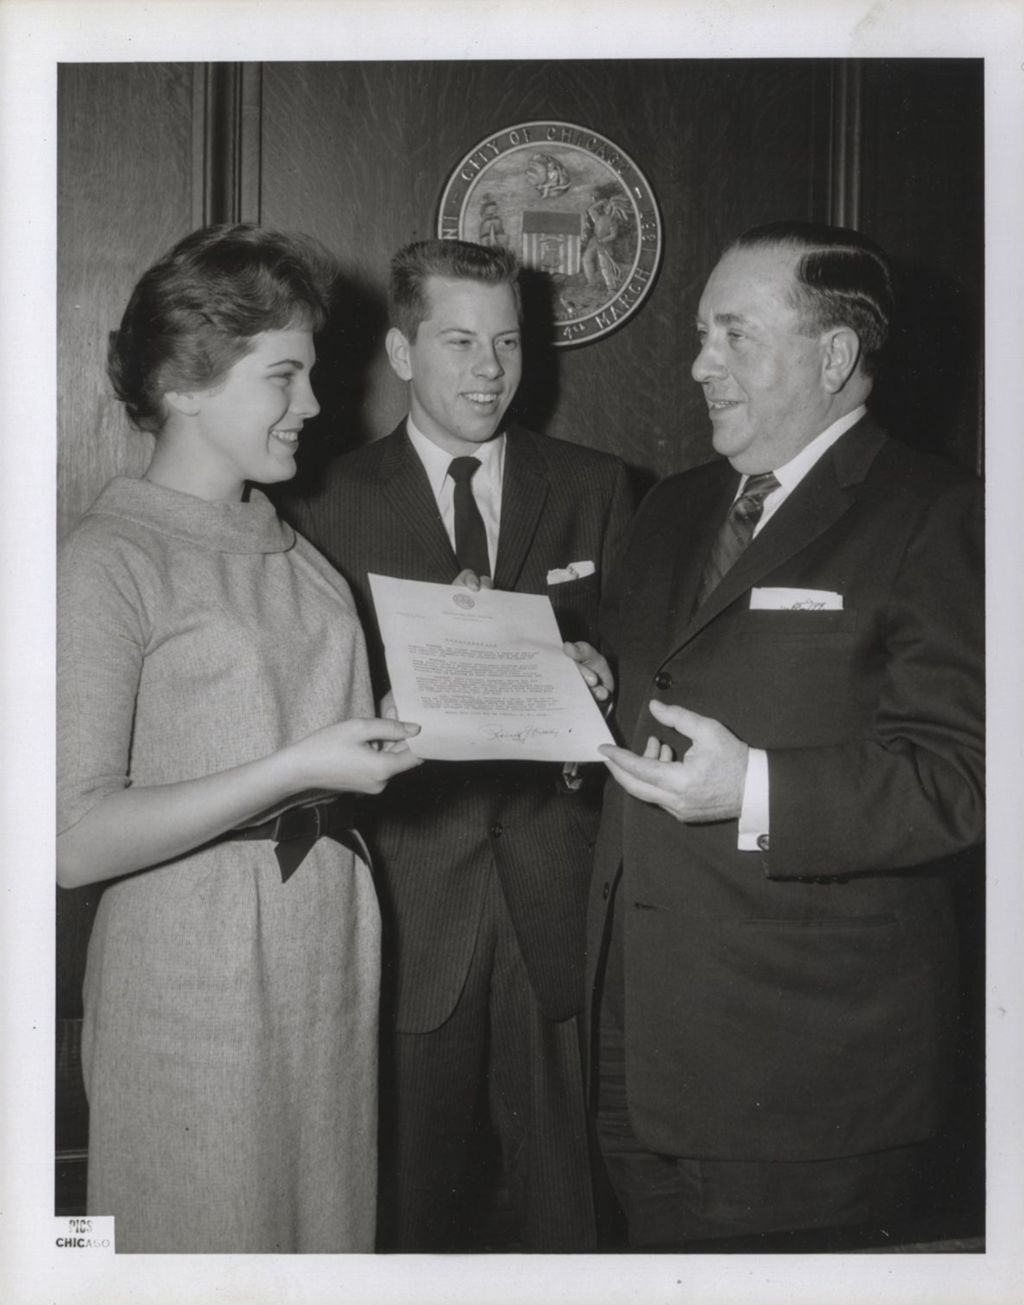 Richard J. Daley presenting a mayoral proclamation to a couple